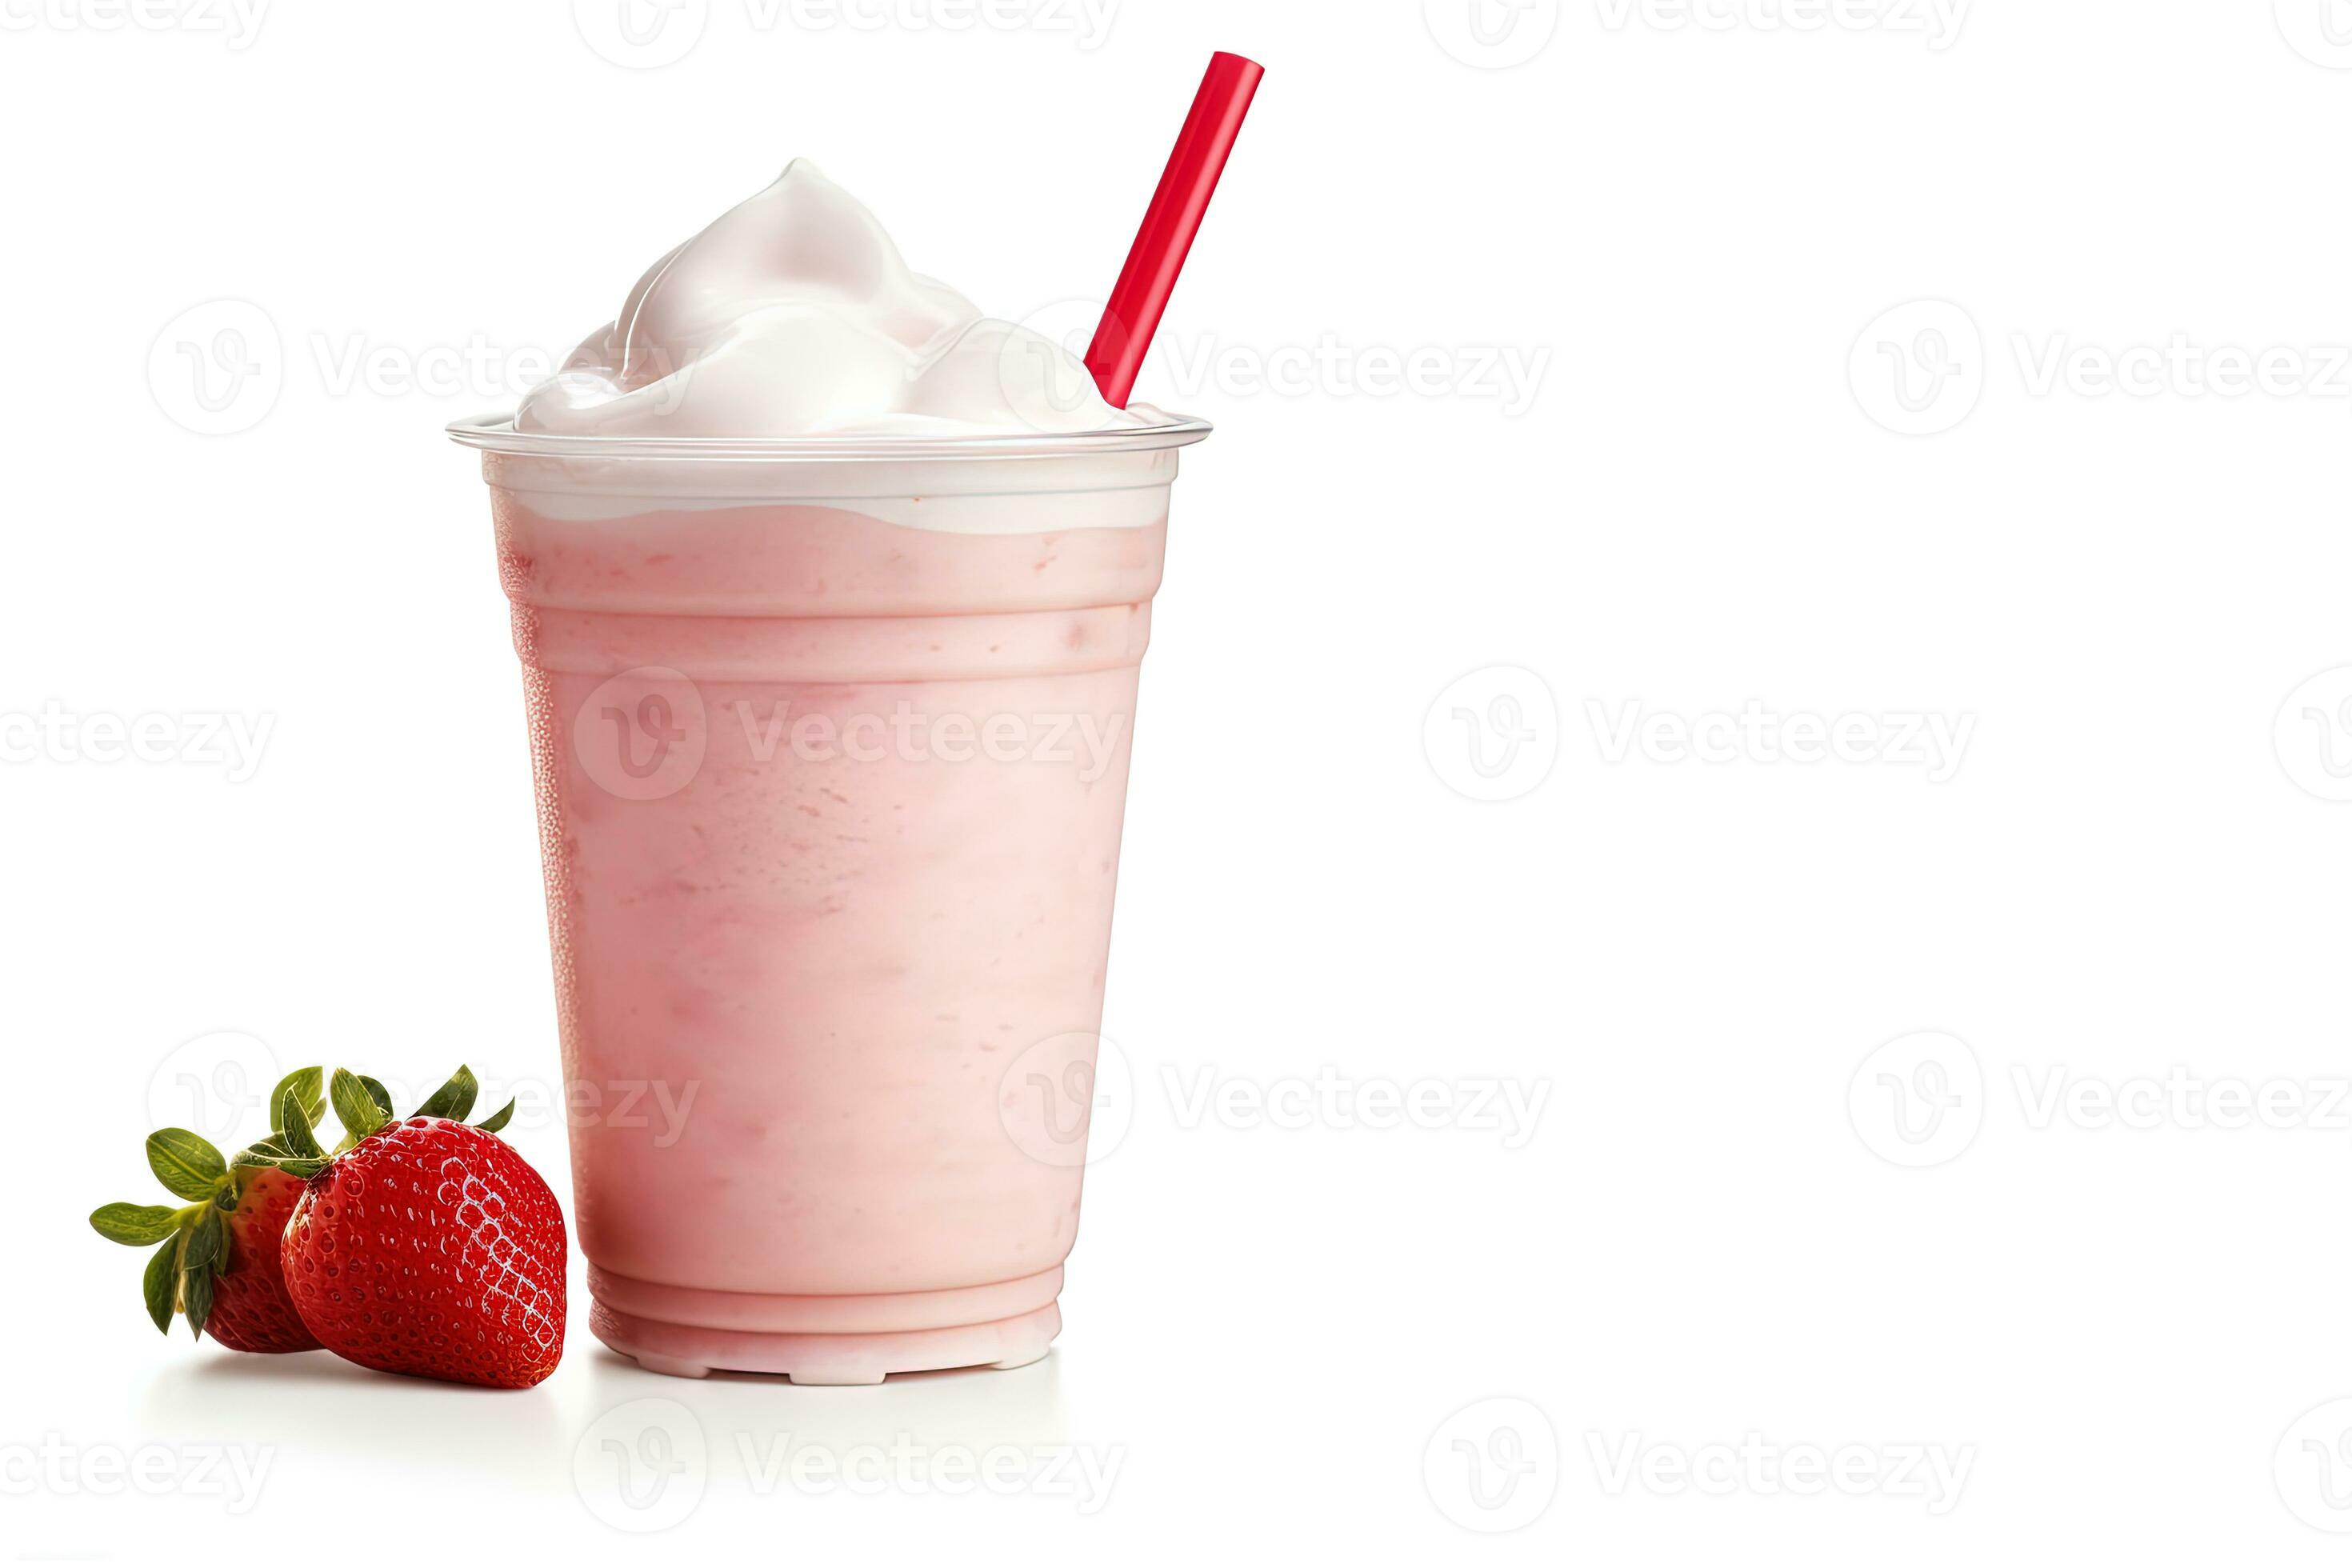 https://static.vecteezy.com/system/resources/previews/026/282/376/large_2x/strawberry-milkshake-in-plastic-takeaway-cup-isolated-on-white-background-with-copy-space-ai-generated-photo.jpg